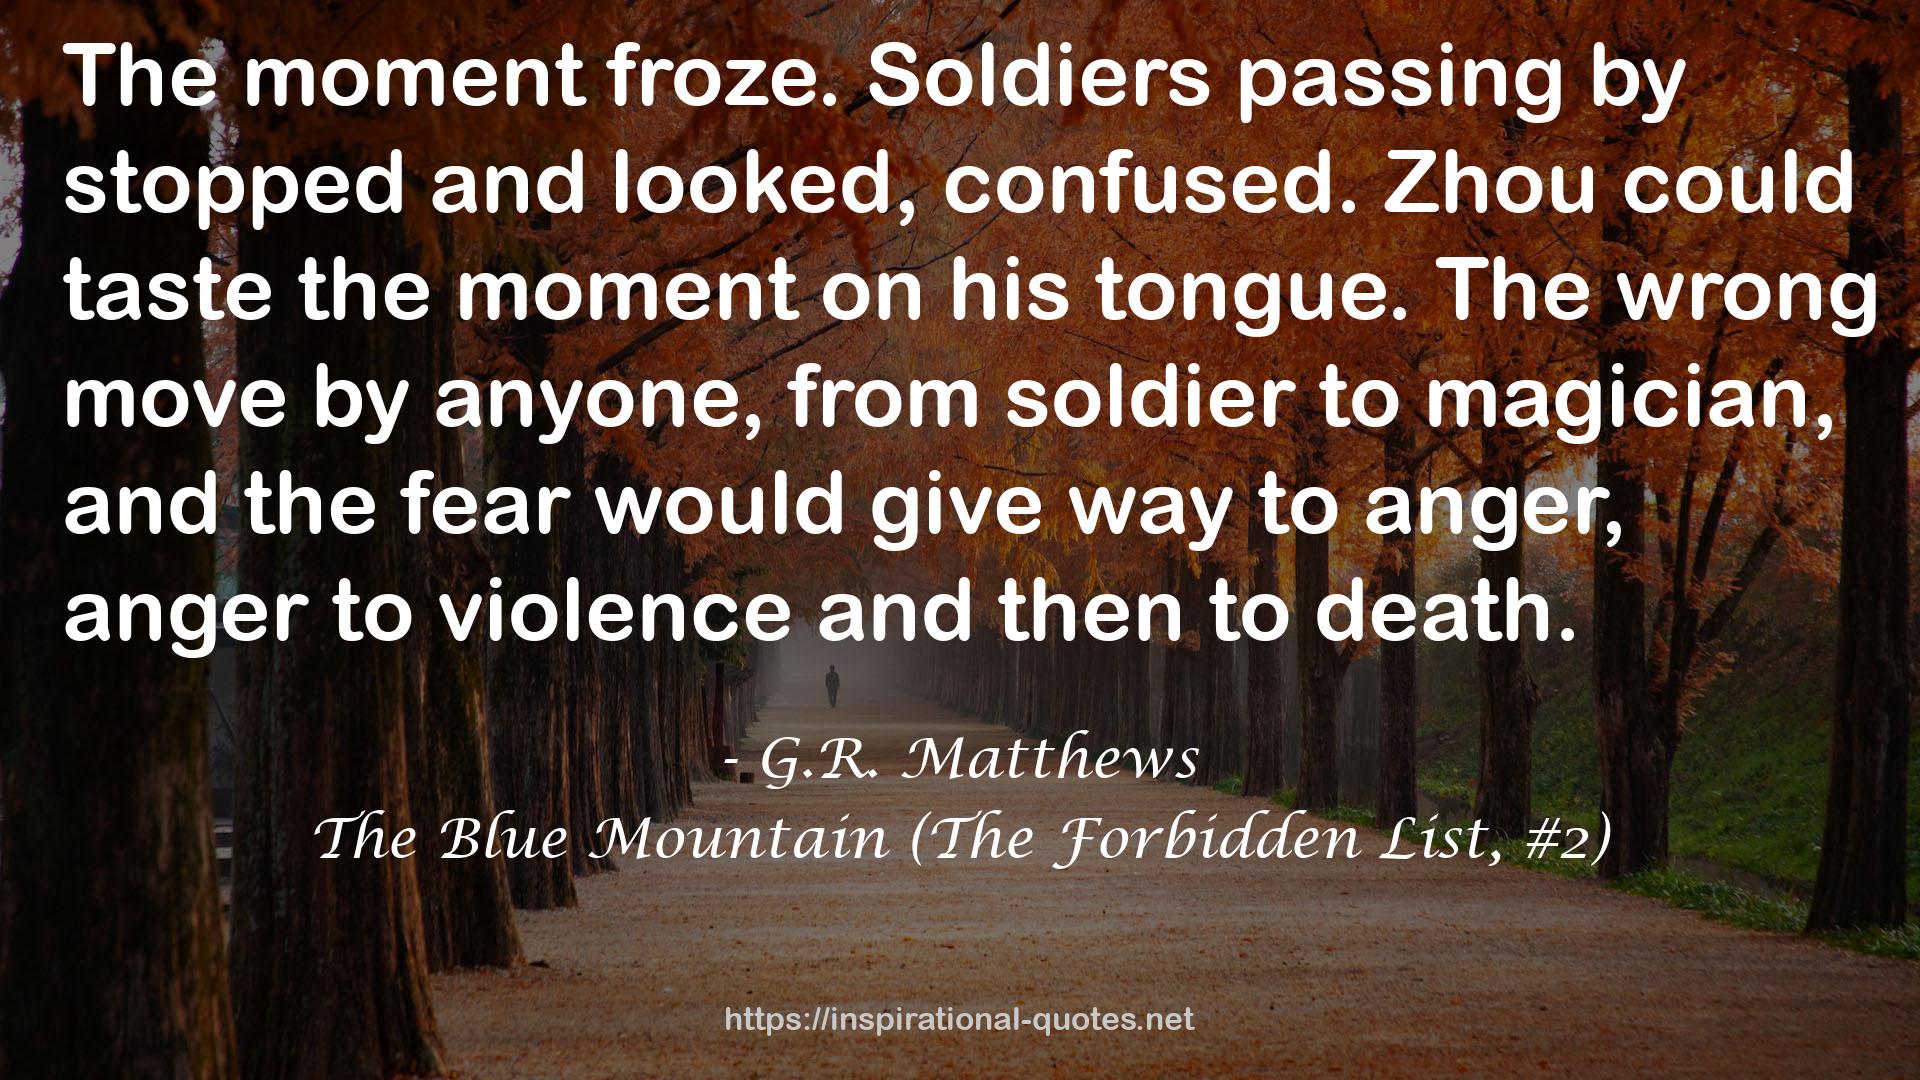 The Blue Mountain (The Forbidden List, #2) QUOTES